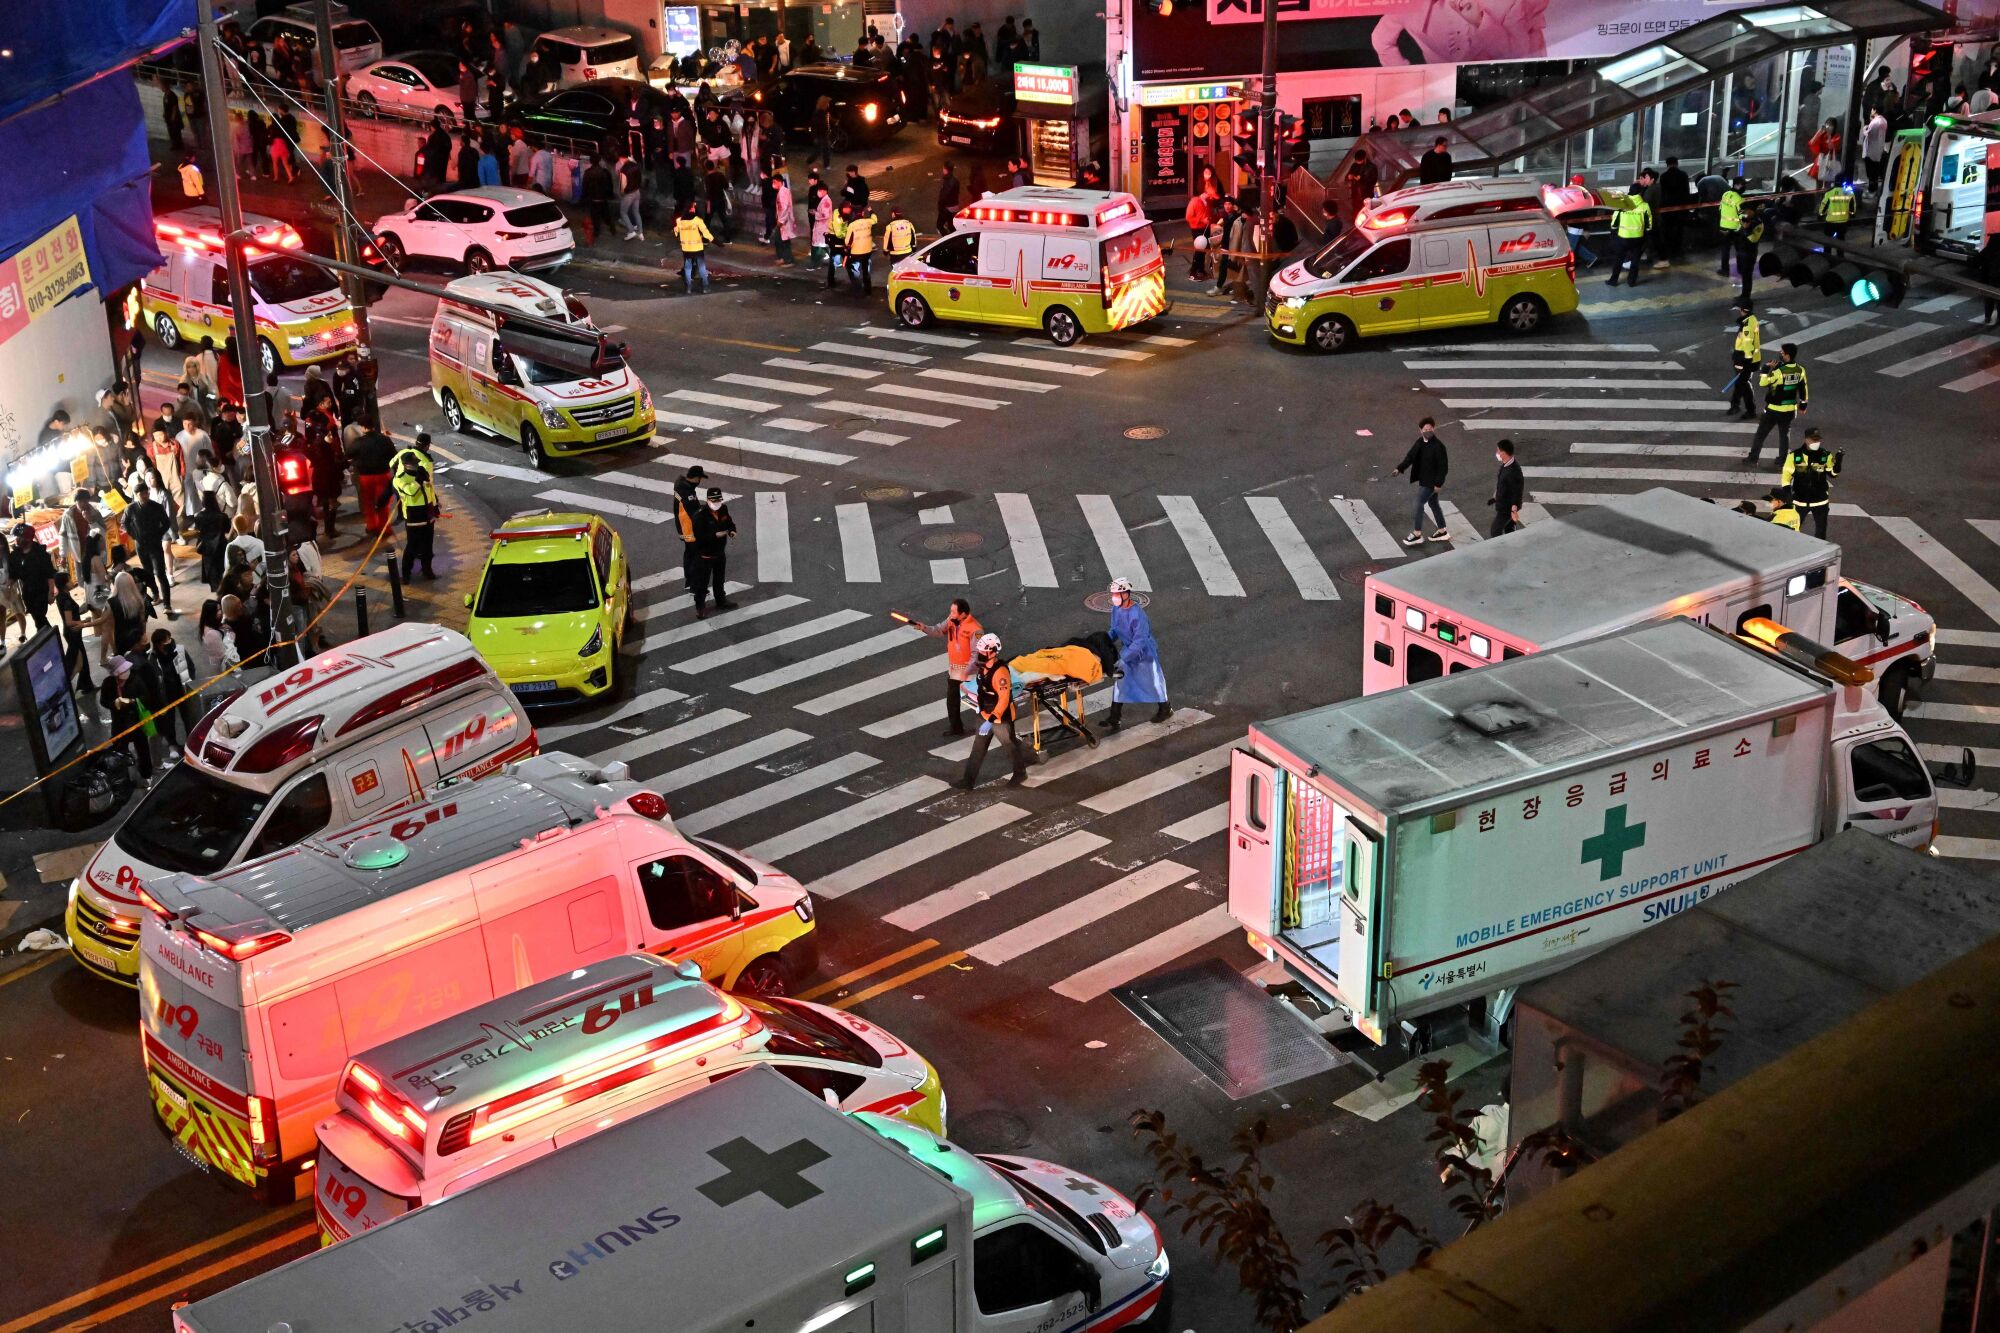 Emergency vehicles are parked around an intersection in which a person is transported on a gurney. 